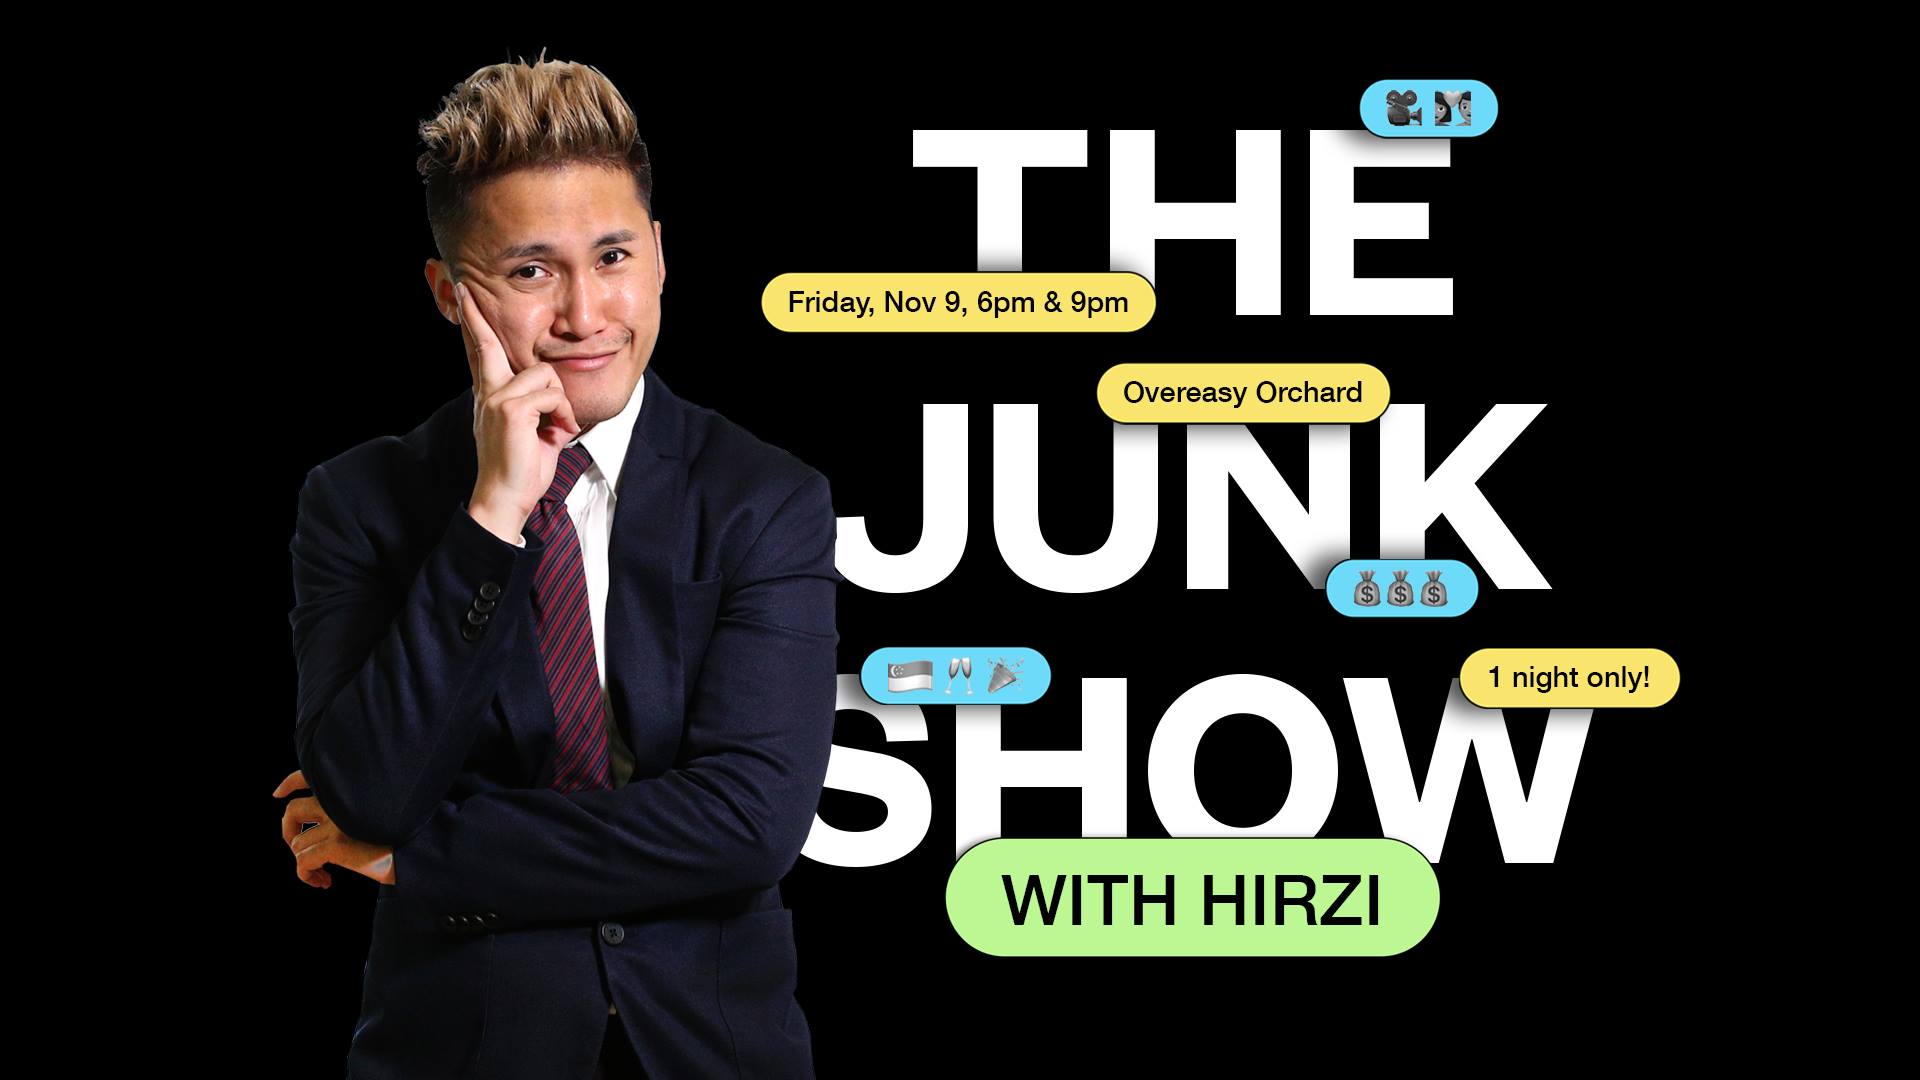 The Junk Show with Hirzi